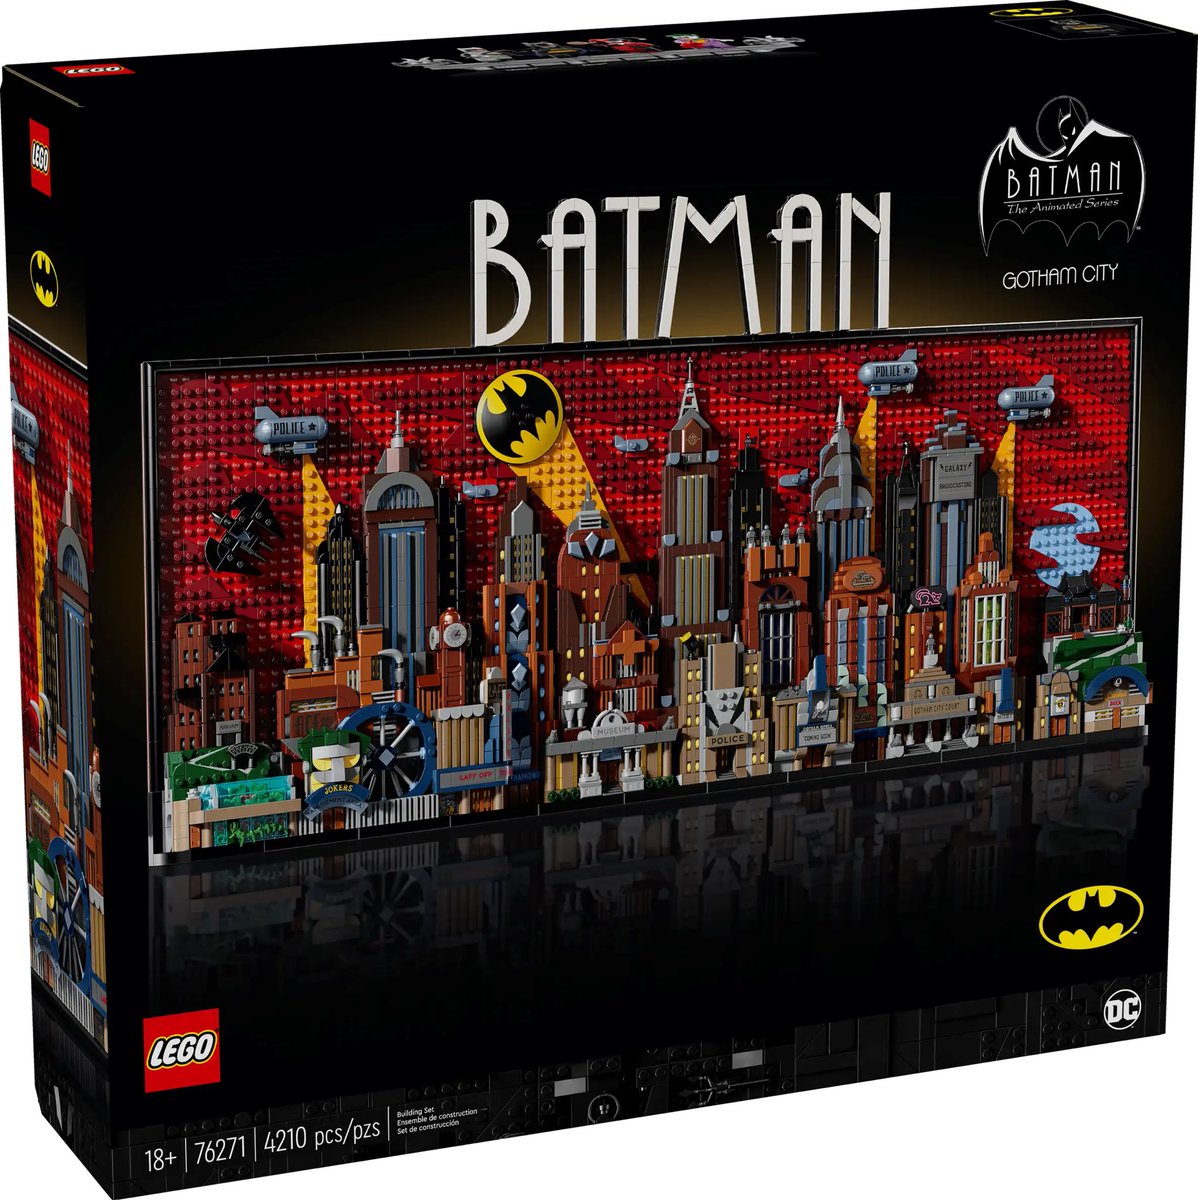 Lego is releasing a ‘BATMAN: THE ANIMATED SERIES’ set. Will cost $299.99 and release on April 4.